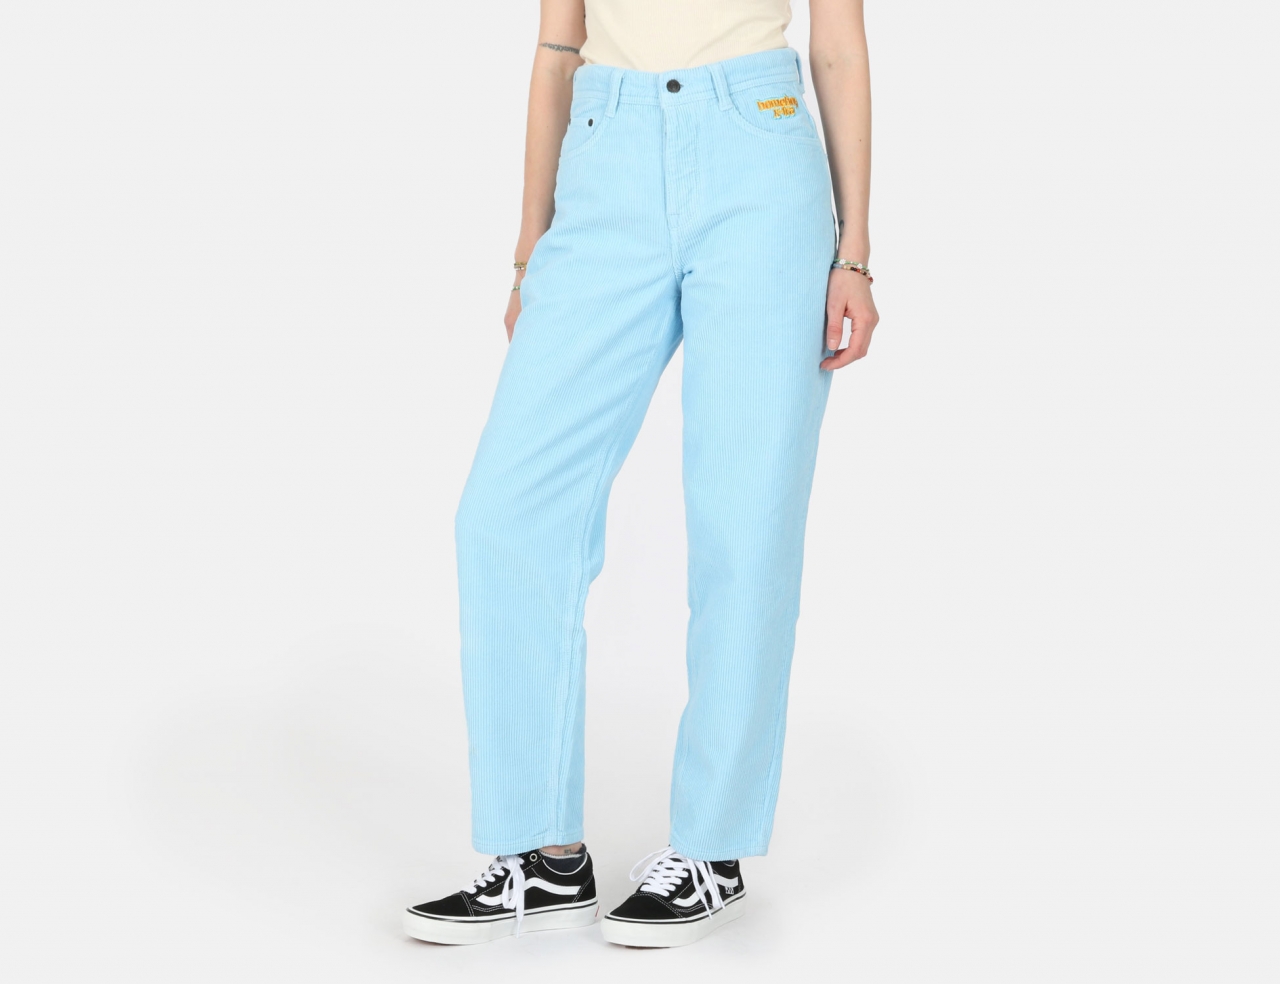 Homeboy x-tra Baggy Cord Pant - Pool Blue